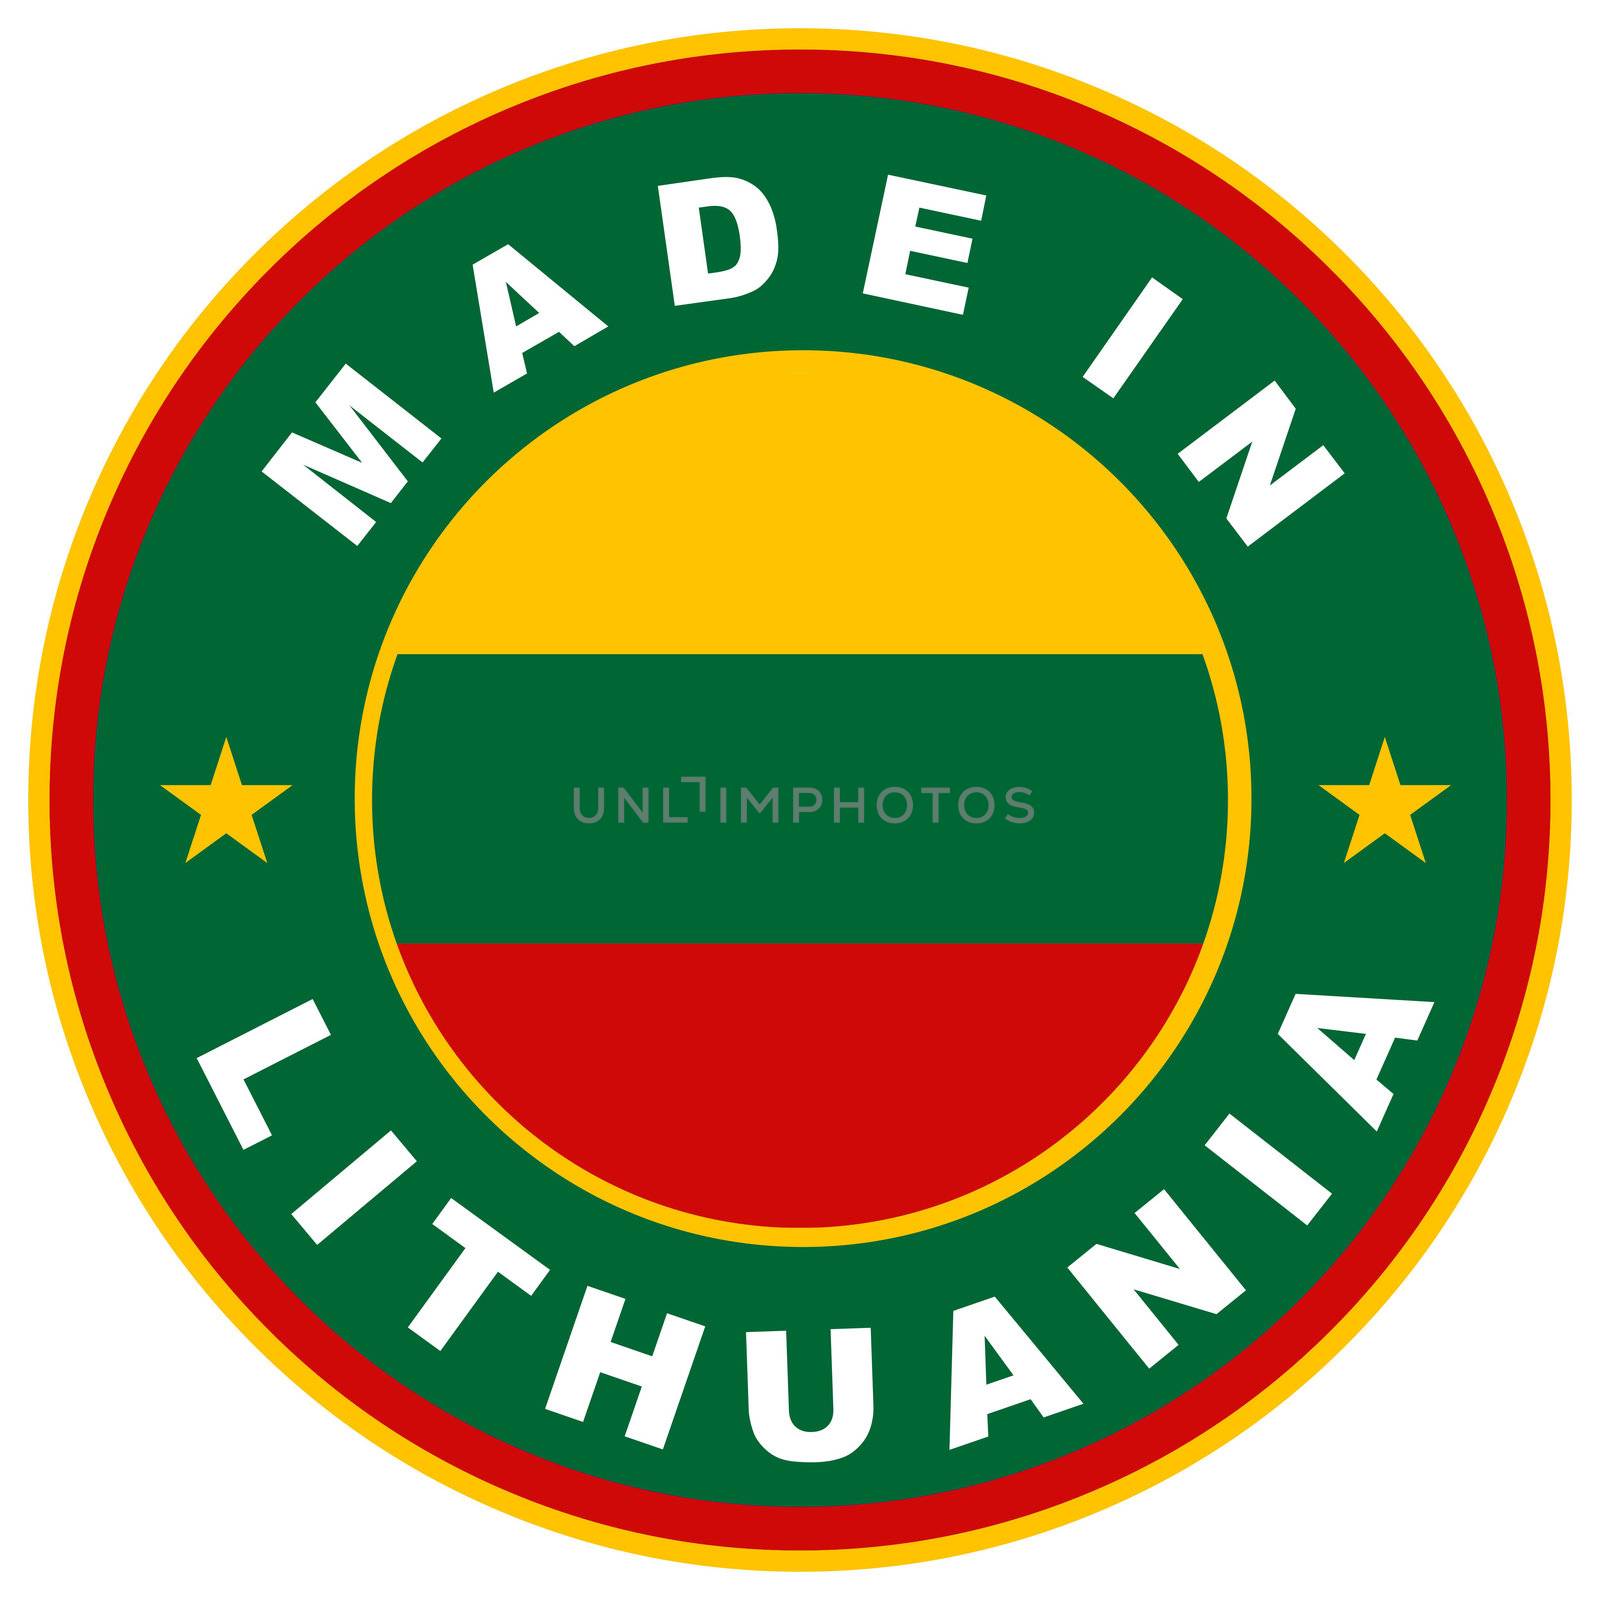 made in lithuania by tony4urban